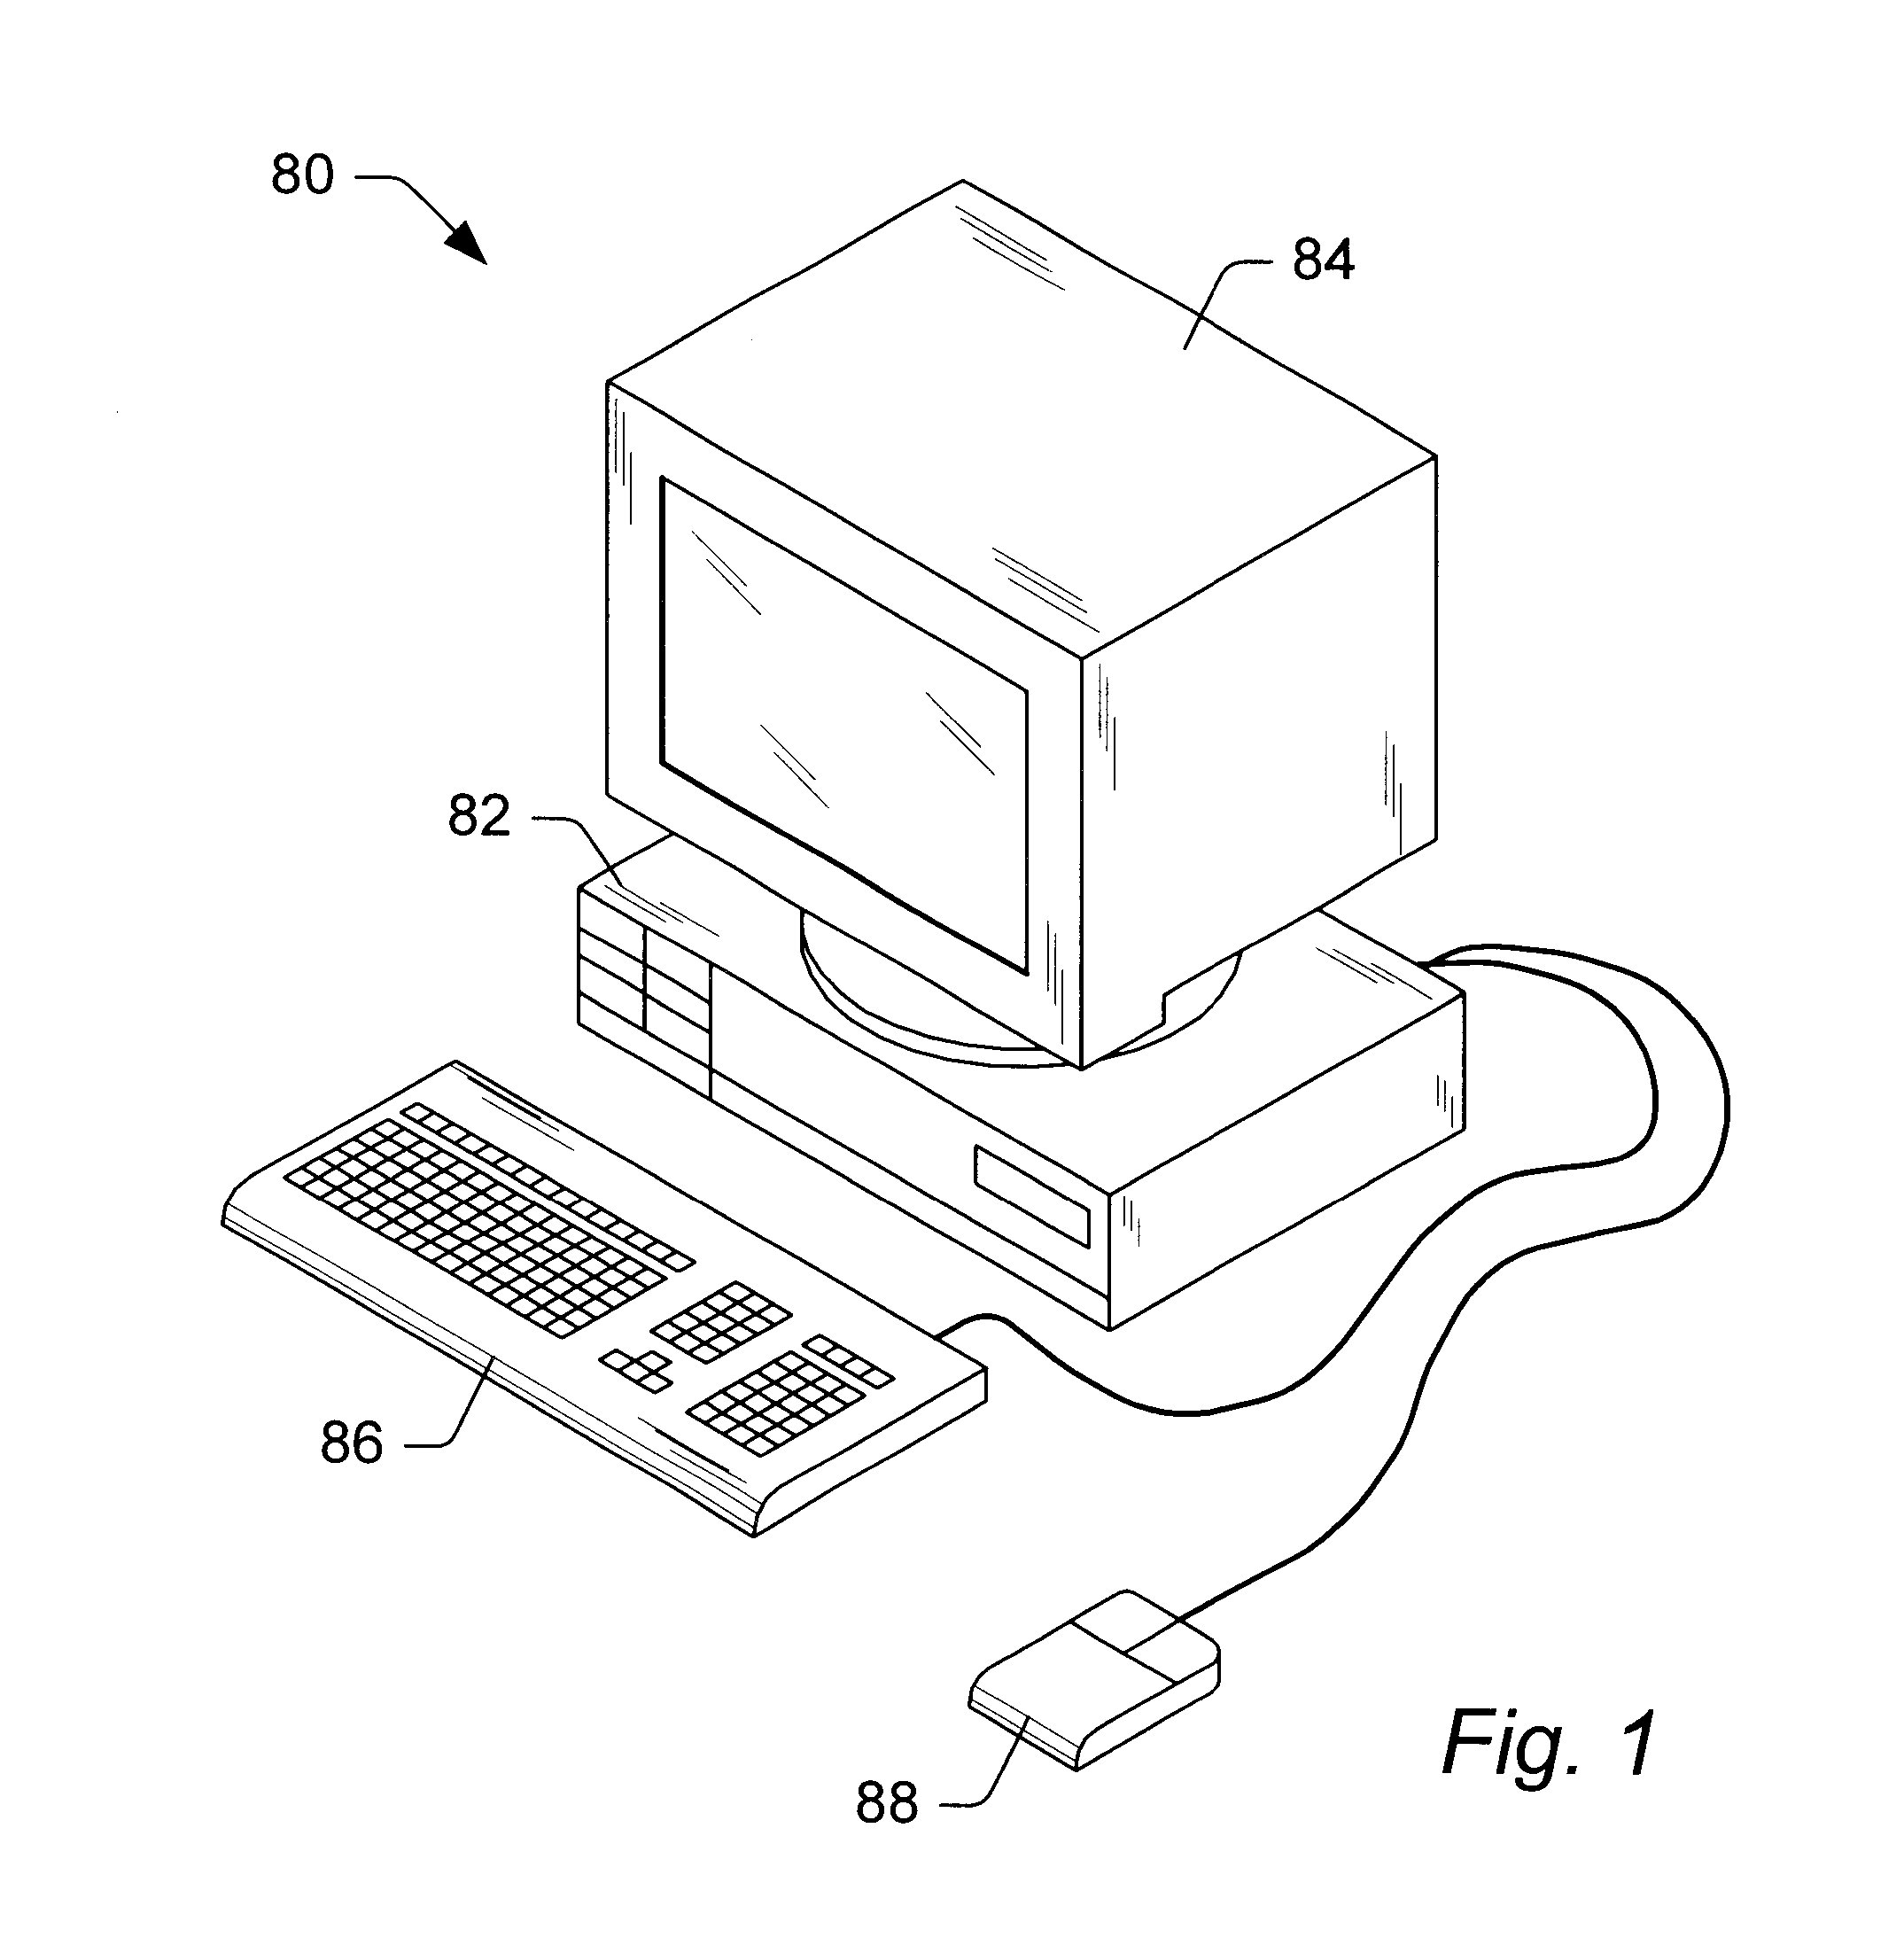 Graphics system with programmable sample positions